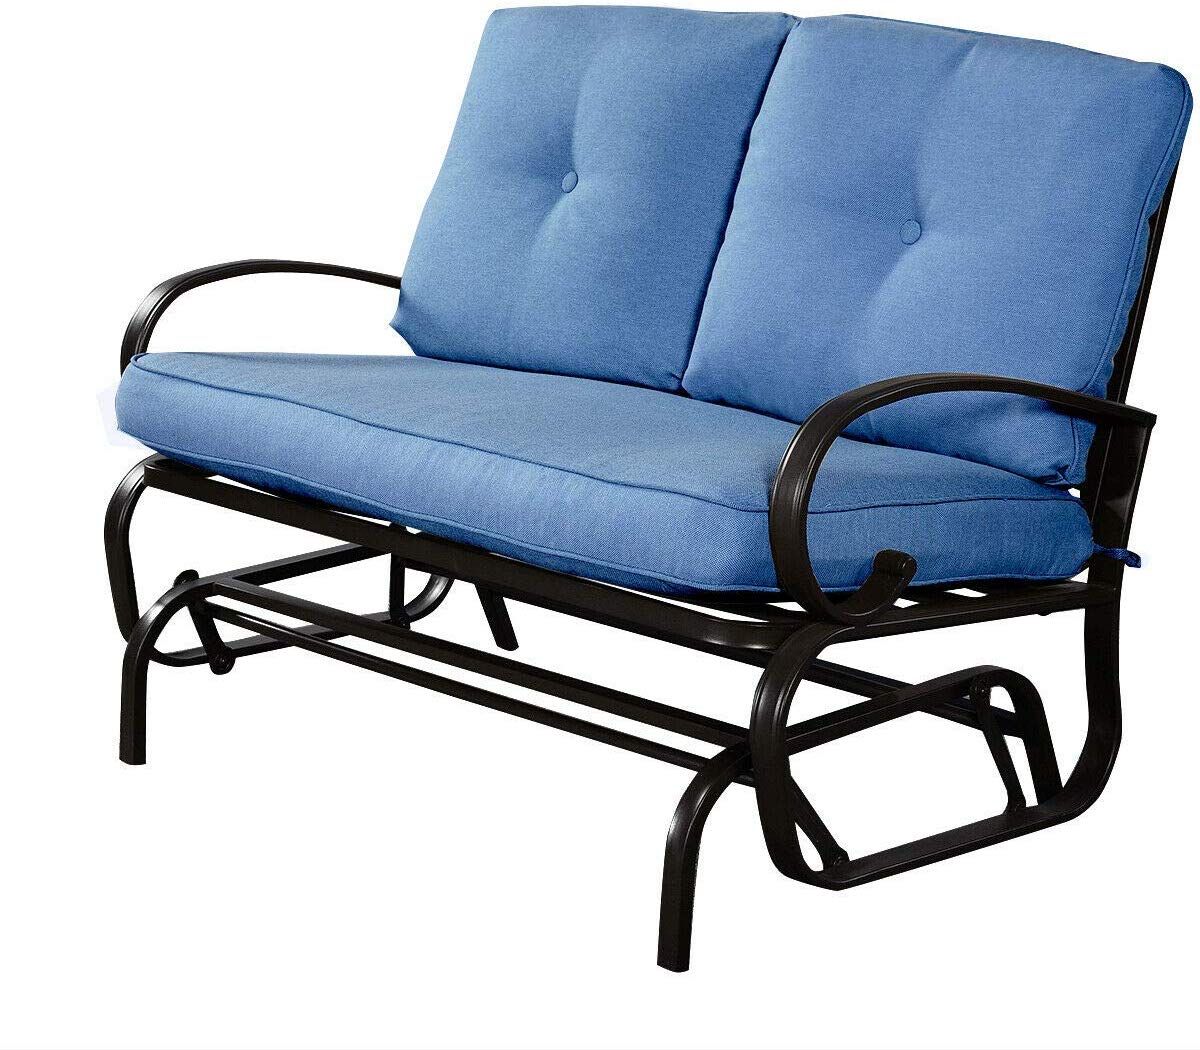 2 Person Loveseat Chair Patio Porch Swings With Rocker Pertaining To 2019 Amazon: Outdoor Patio Glider Bench Loveseat For 2 Person (View 19 of 30)